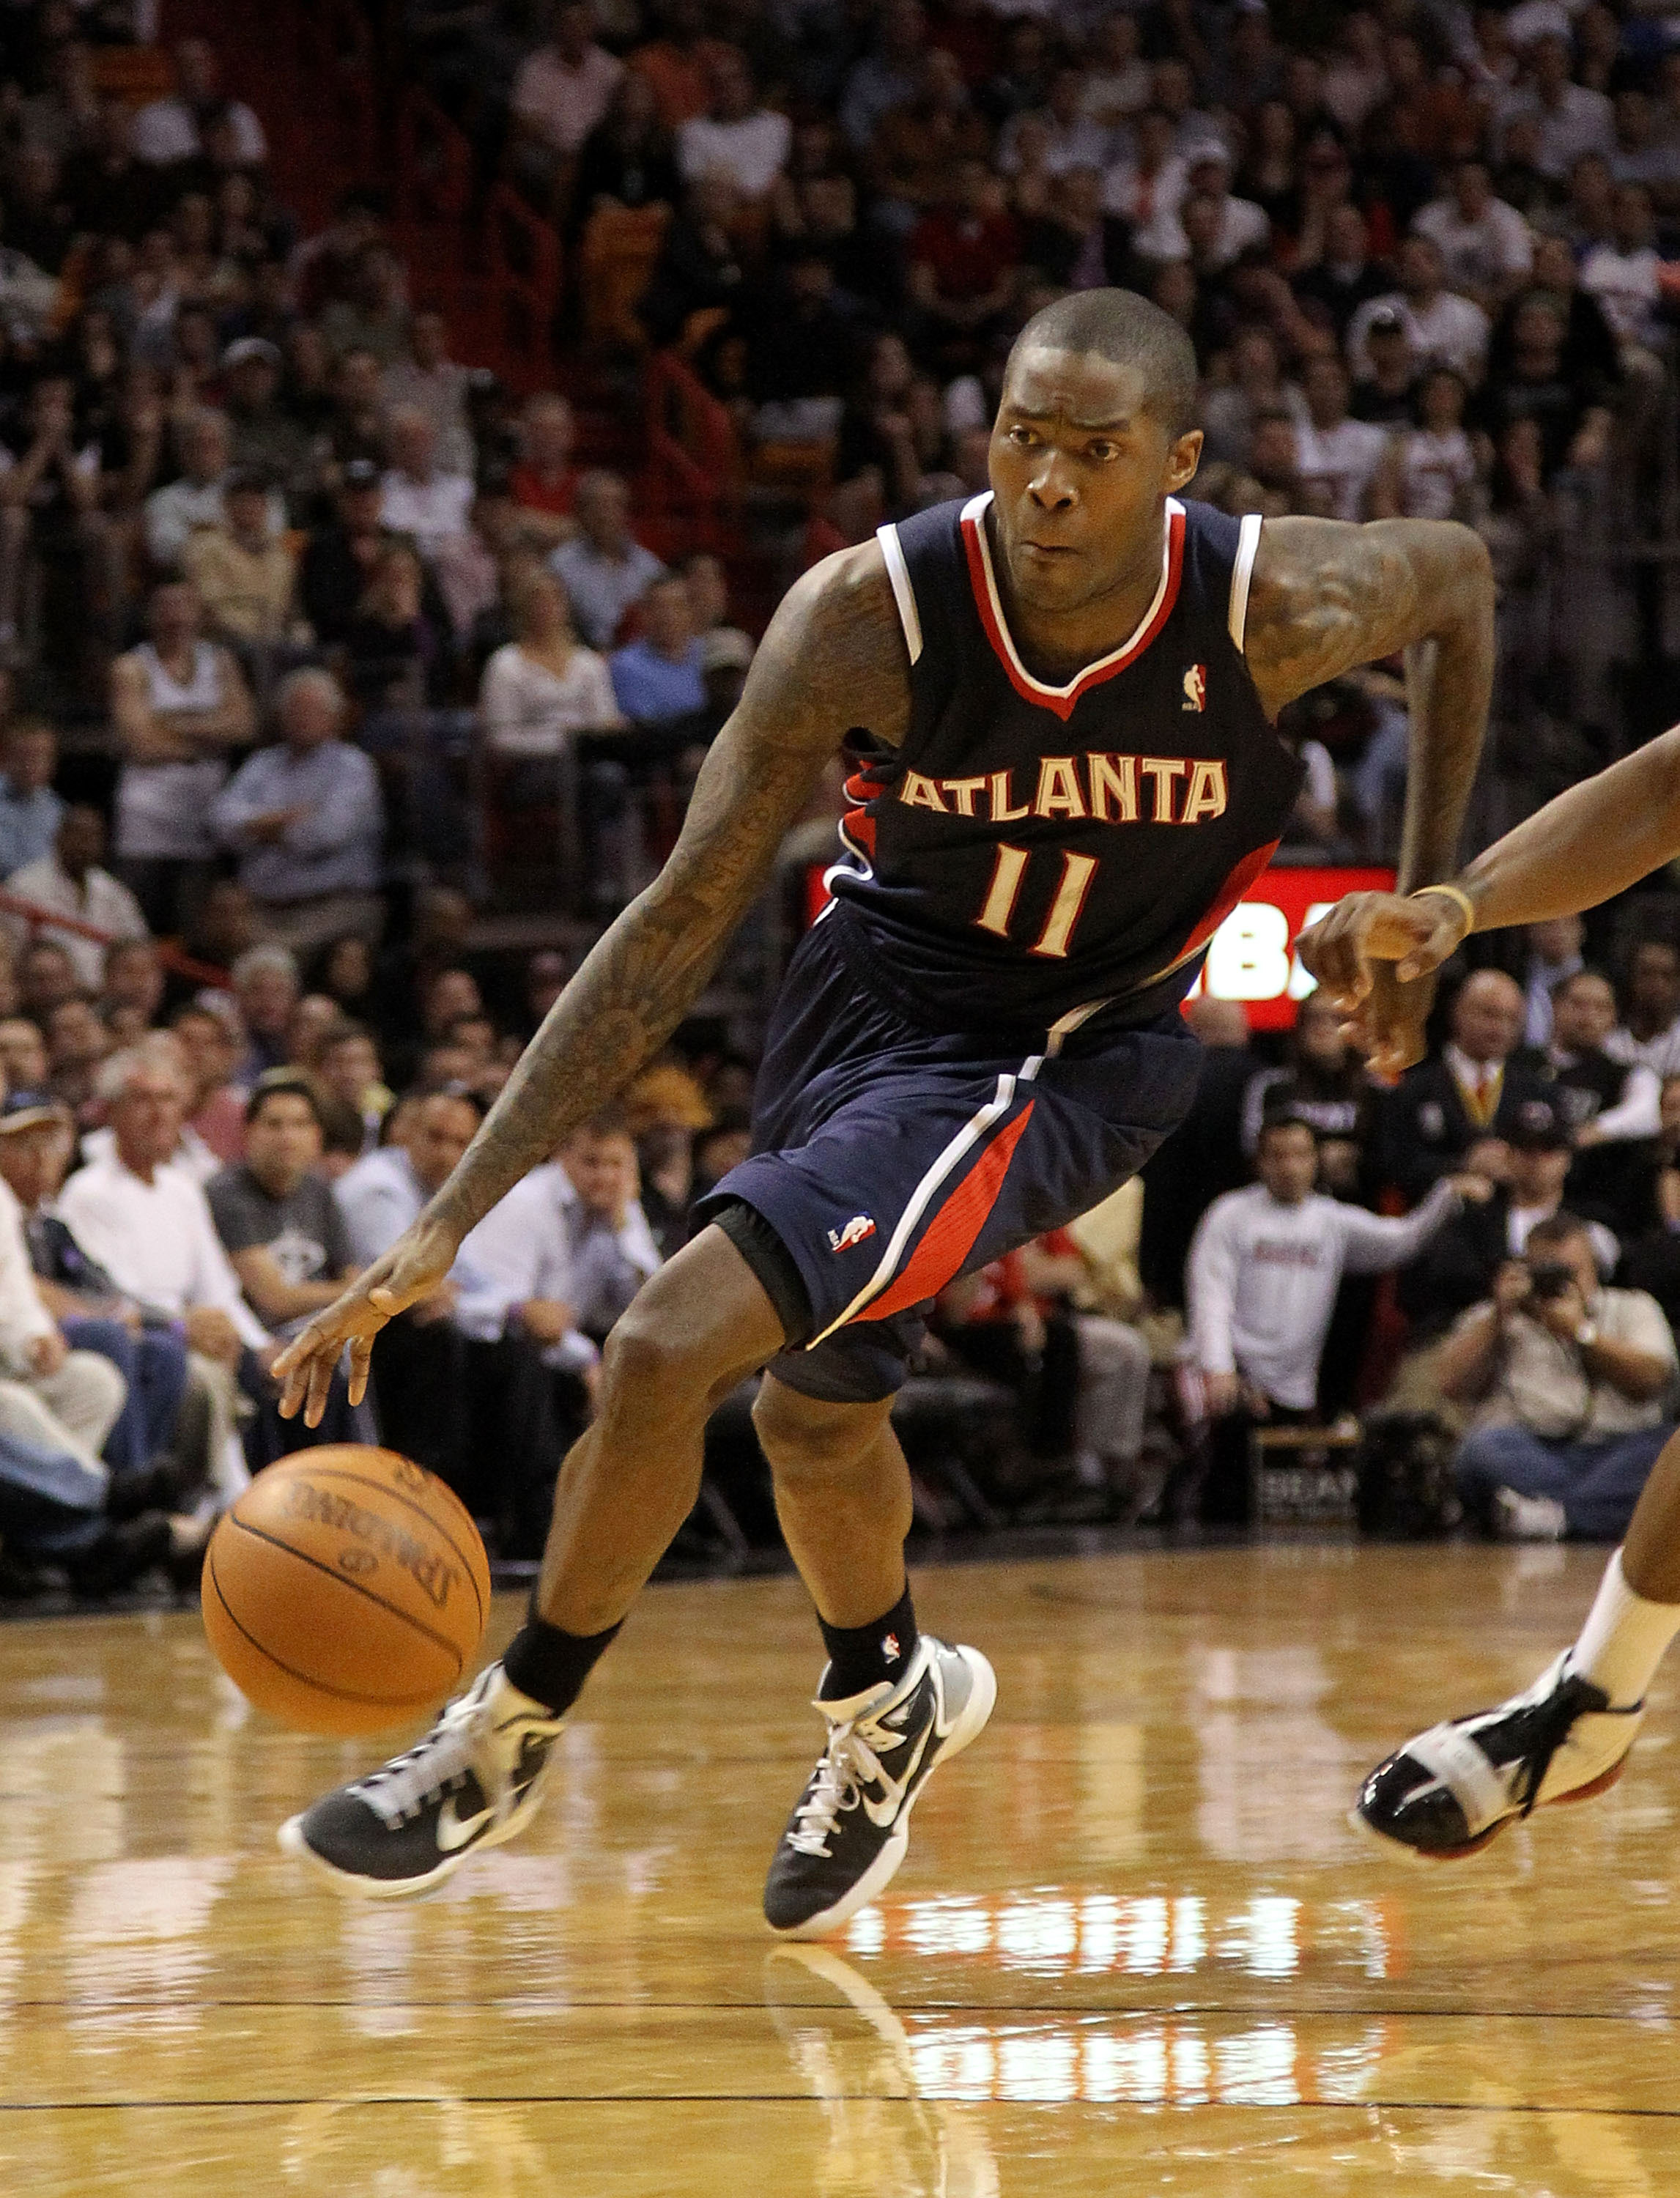 MIAMI, FL - JANUARY 18:  Jamal Crawford #11 of the Atlanta Hawks drives to the lane during a game against the Miami Heat at American Airlines Arena on January 18, 2011 in Miami, Florida. NOTE TO USER: User expressly acknowledges and agrees that, by downlo